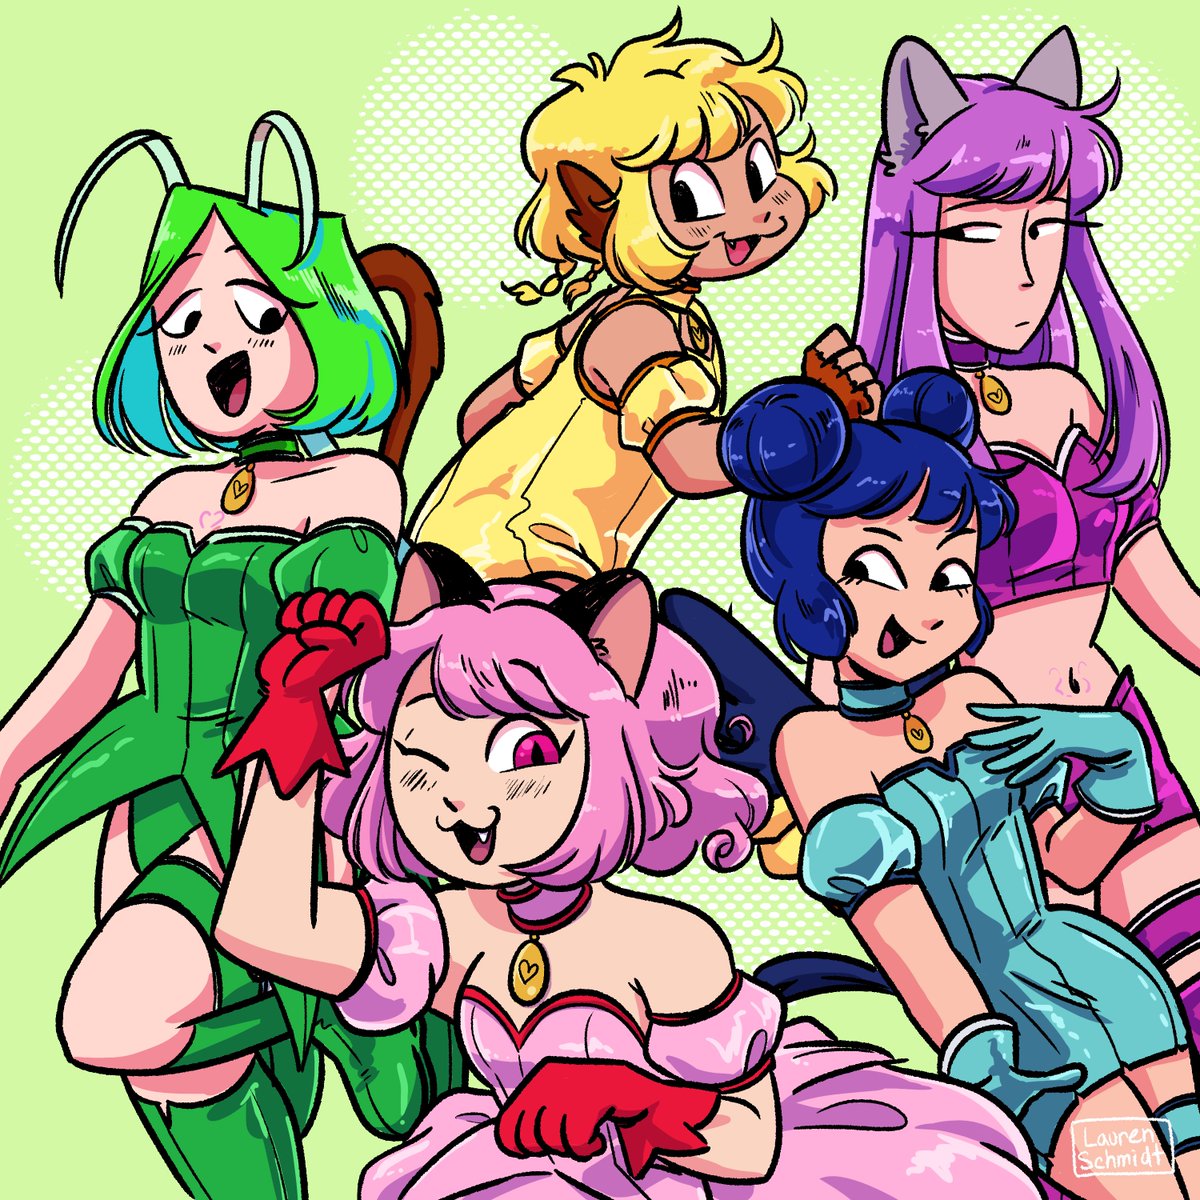 More revisiting influential brain-altering anime from my childhood, this time Tokyo Mew Mew